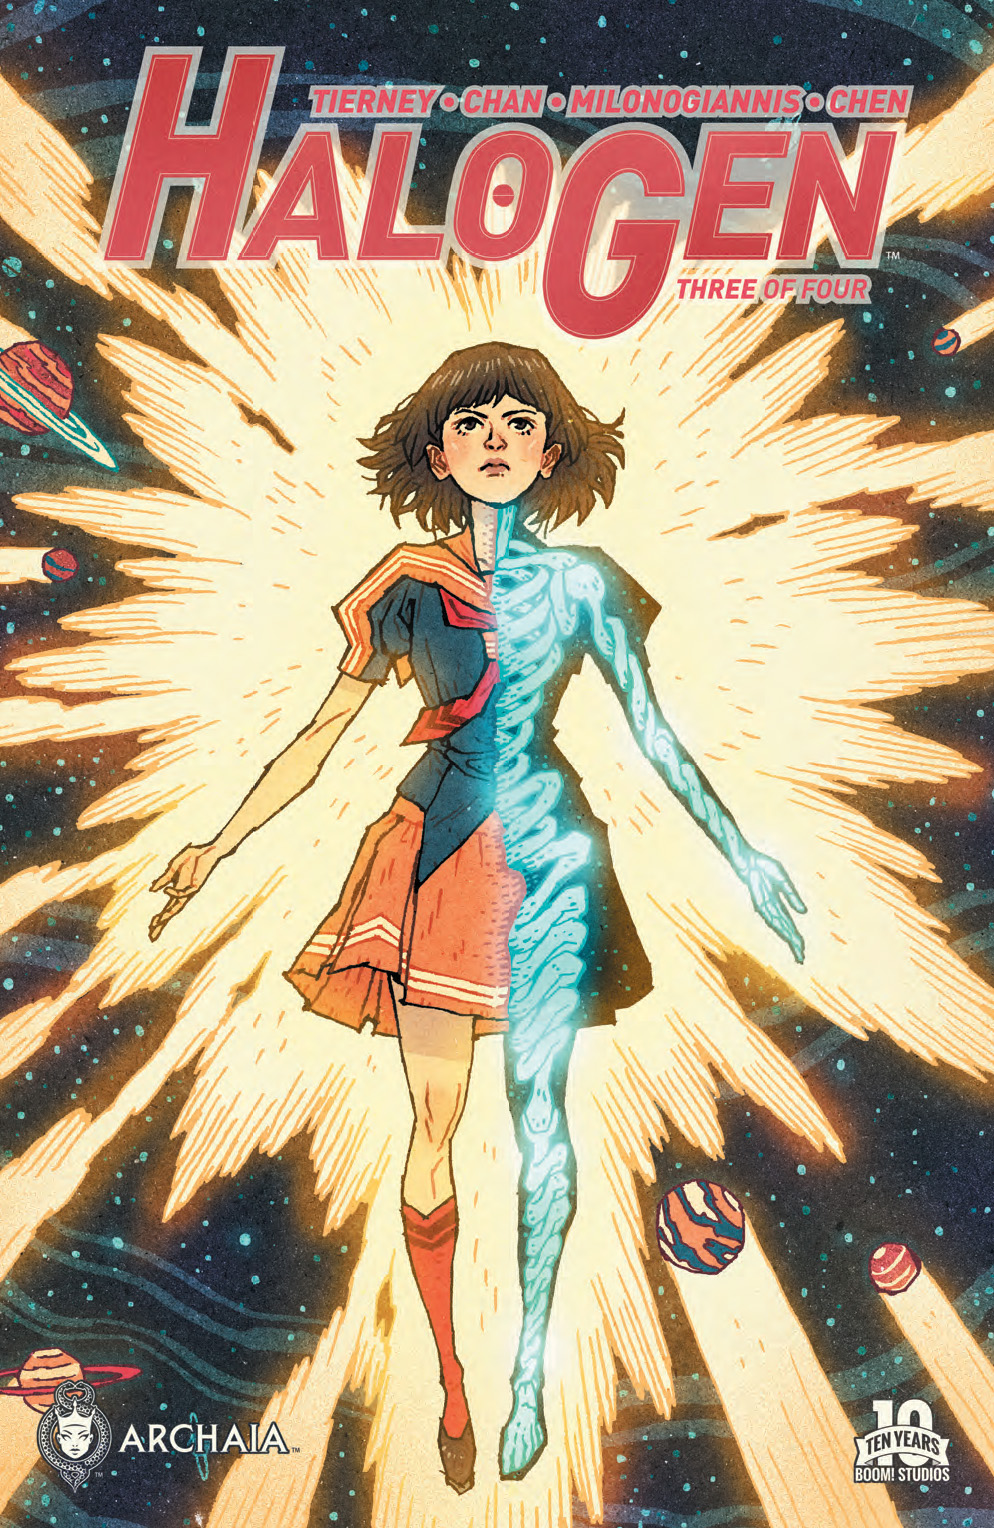 HaloGen #3 (of 4) Preview